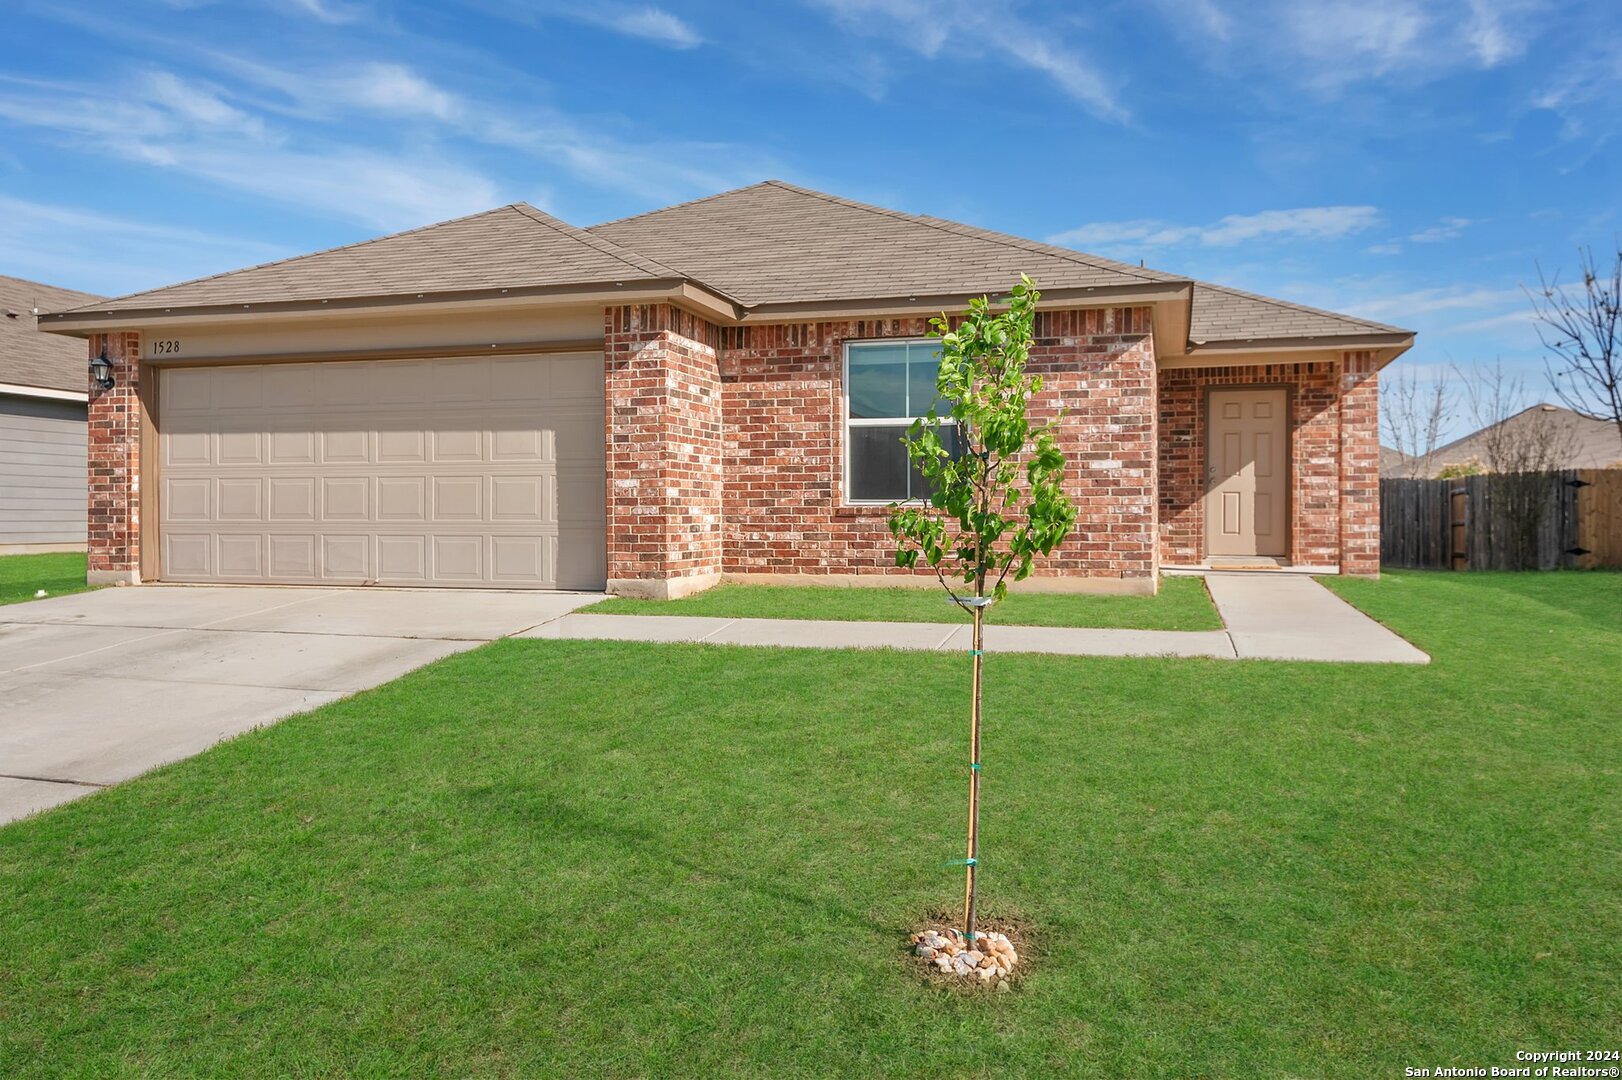 Photo of 1528 Doncaster Dr in Seguin, TX